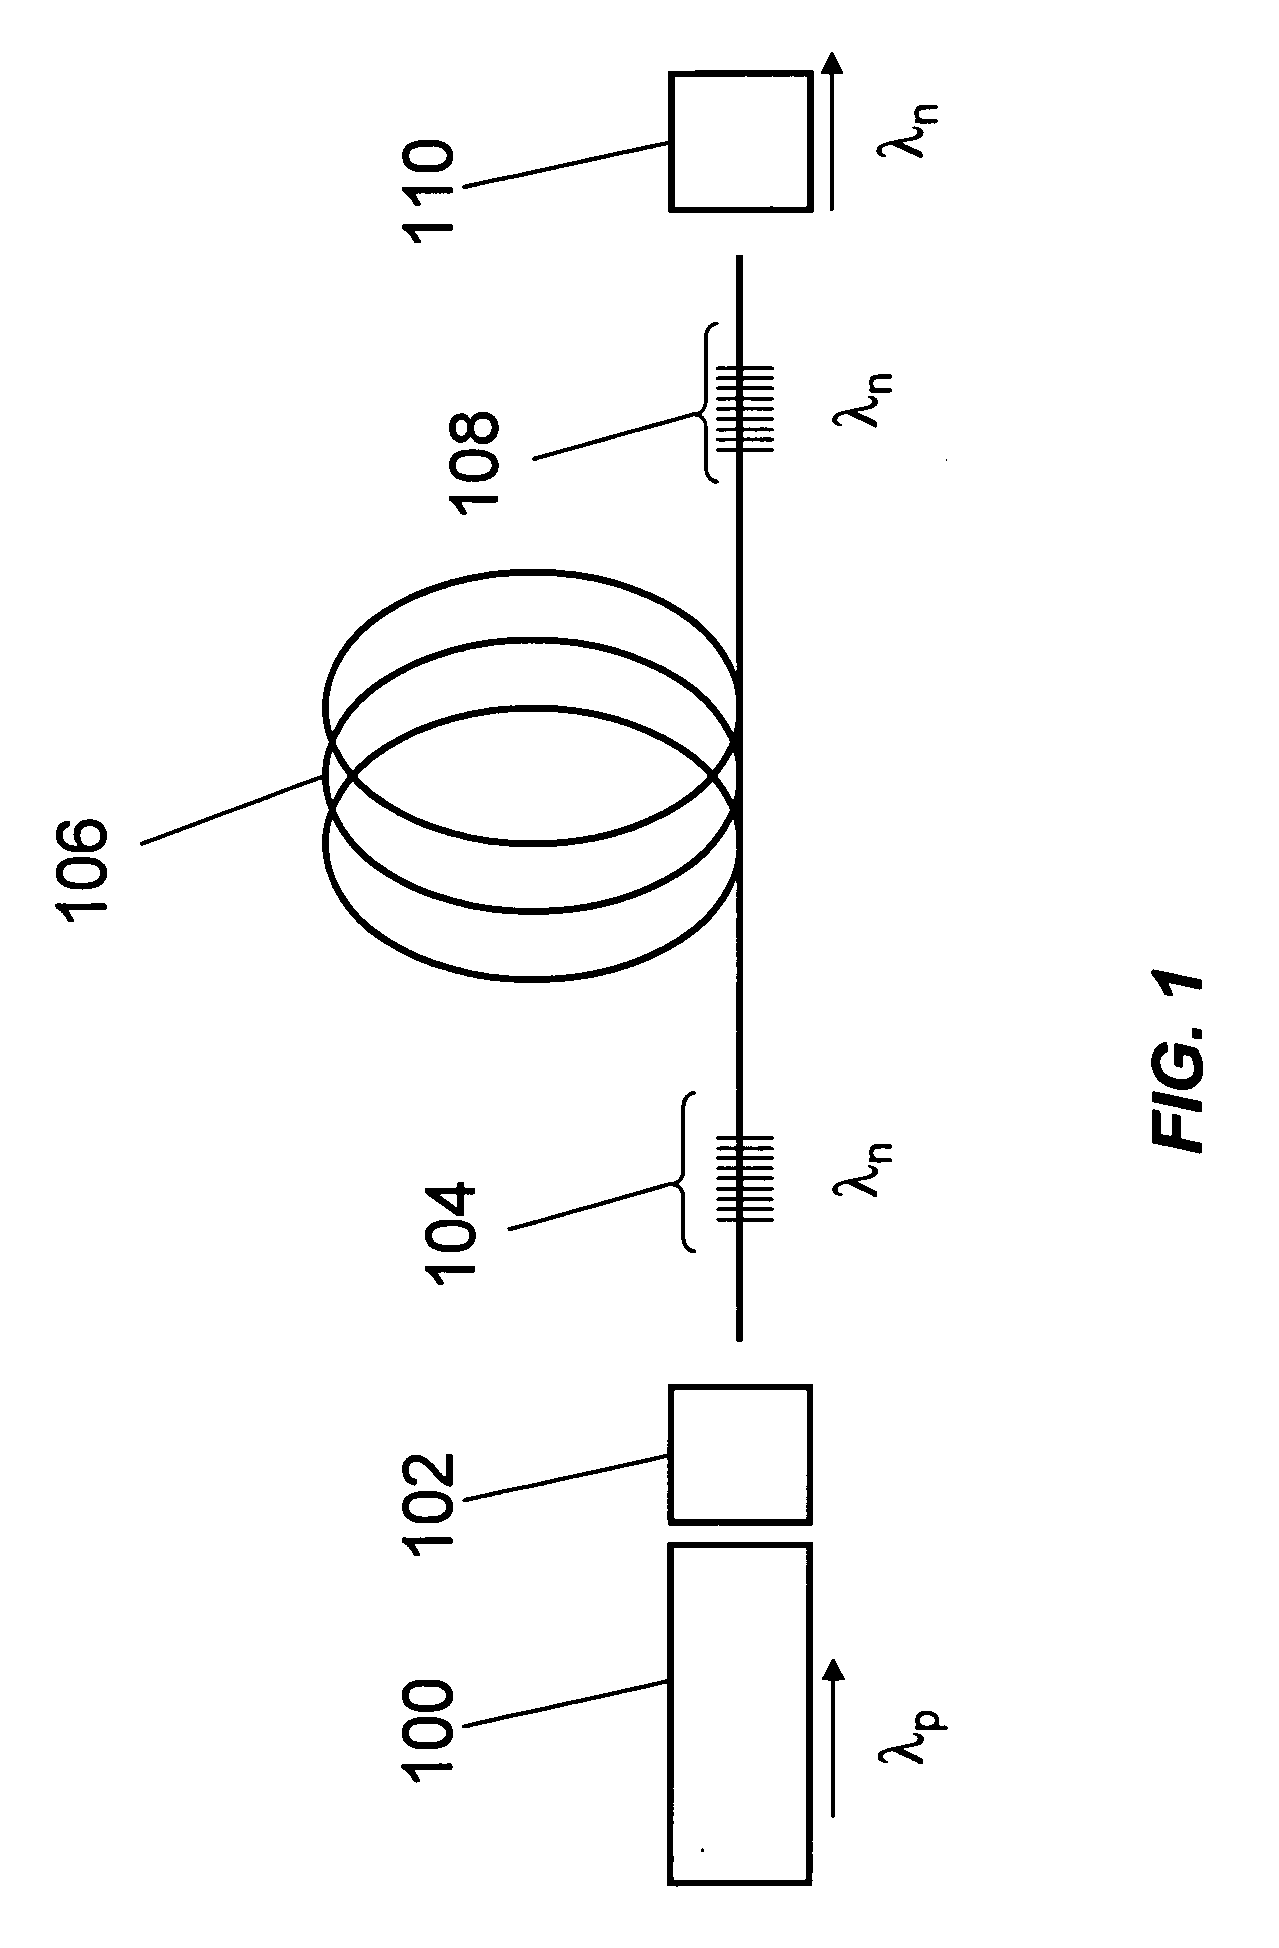 Method and apparatus for generating high power visible and near-visible laser light